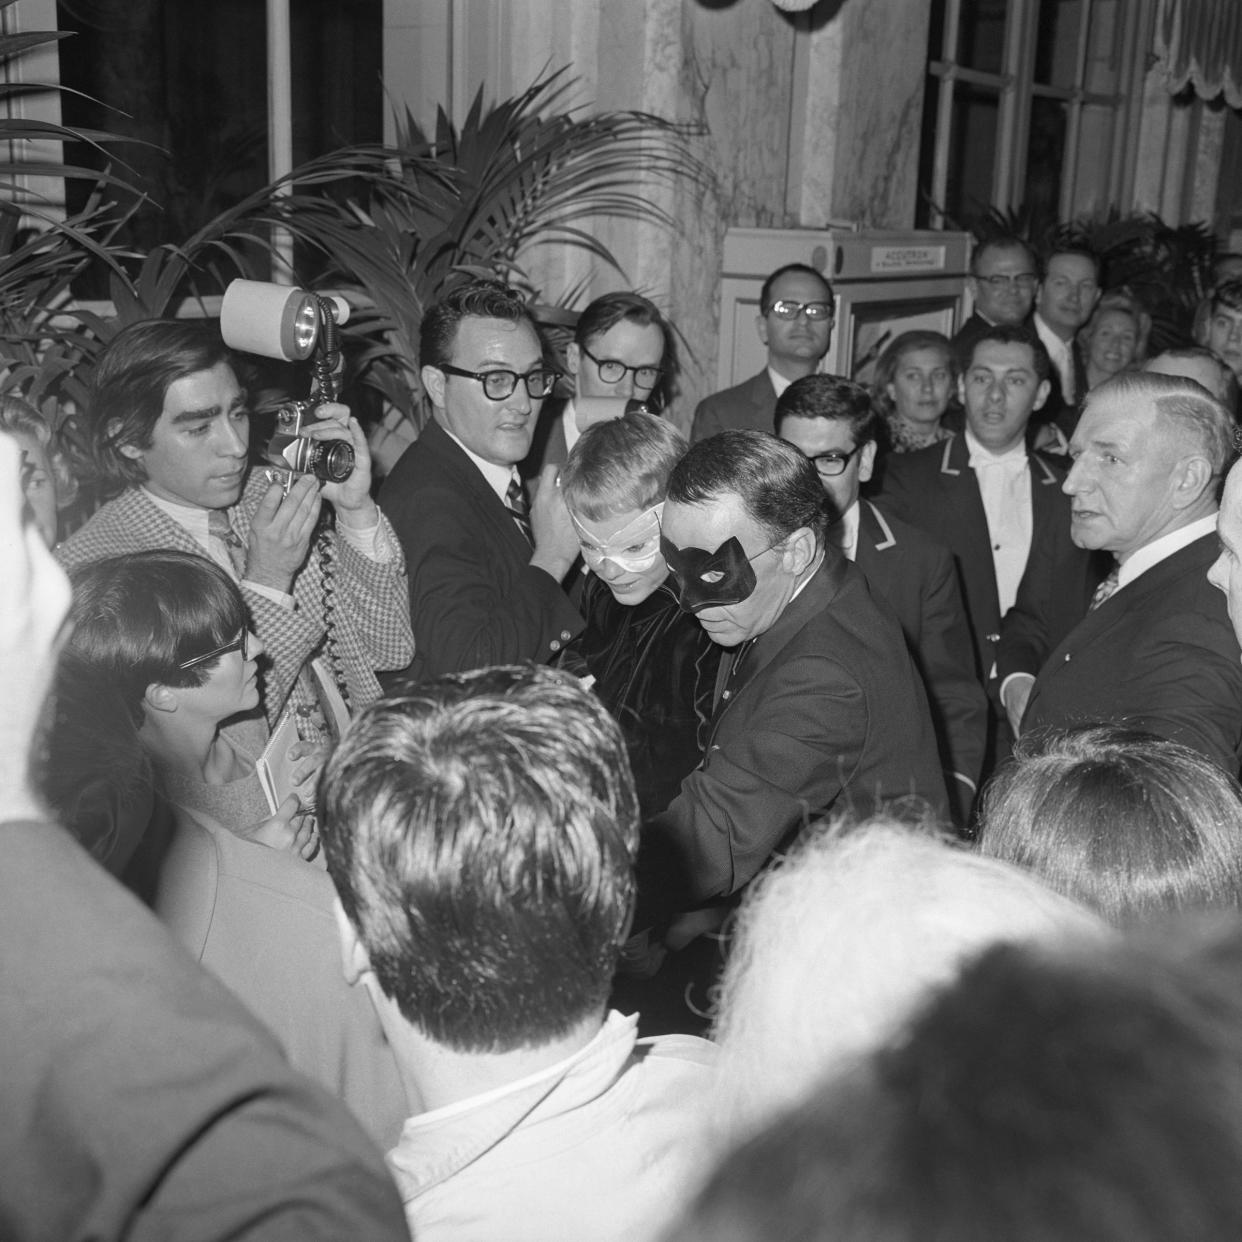 Reporters swarm Frank Sinatra and Mia Farrow as they arrive at Truman Capote’s Black and White Ball.<span class="copyright">Bettmann Archive/Getty Images</span>